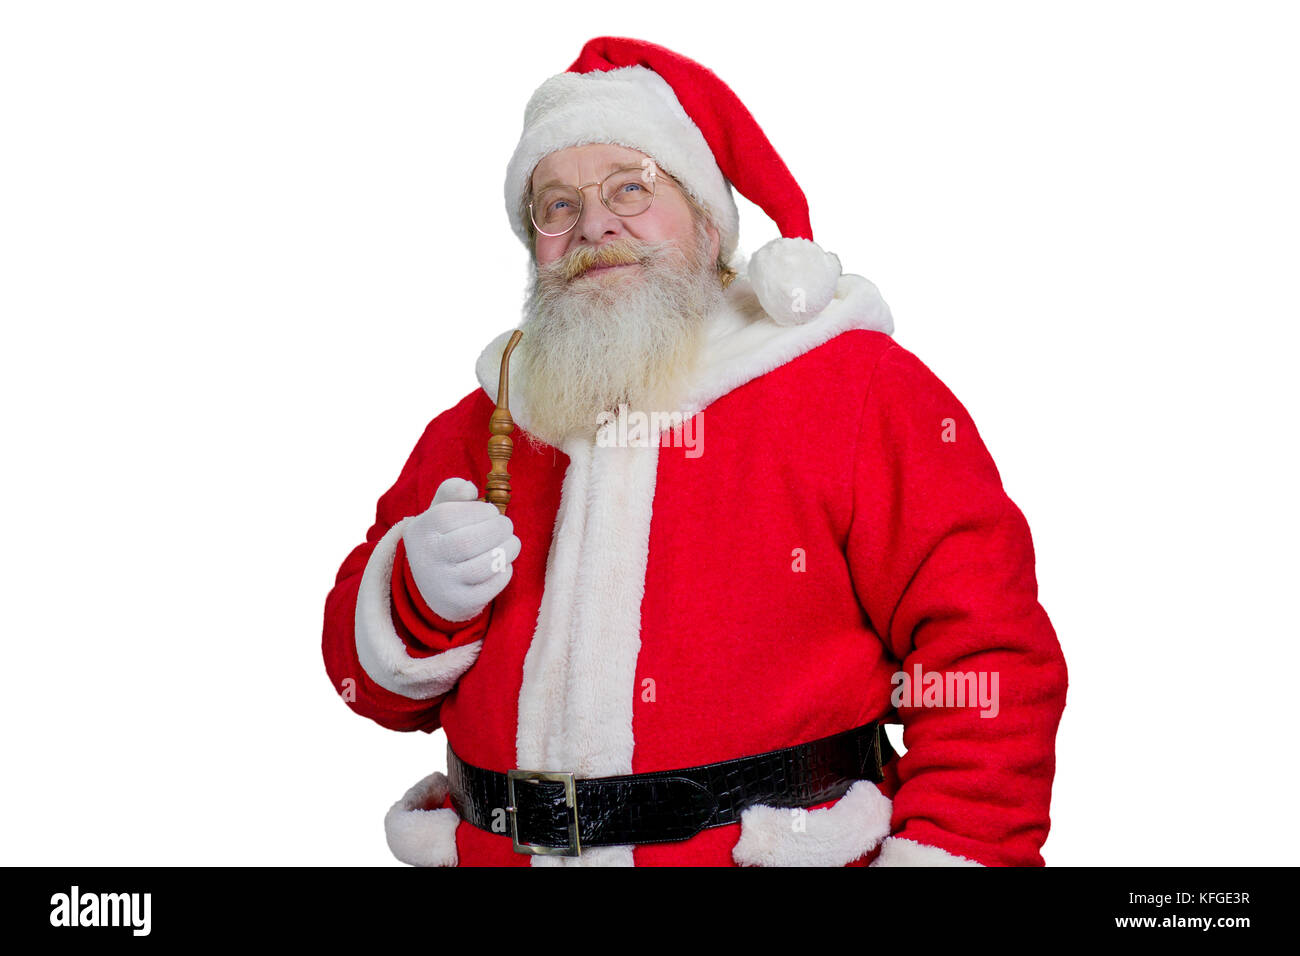 Portrait of Santa Claus with pipe. Bearded Santa Claus holding smoking pipe and looking upwards on white background. Realistic Santa Claus, studio sho Stock Photo